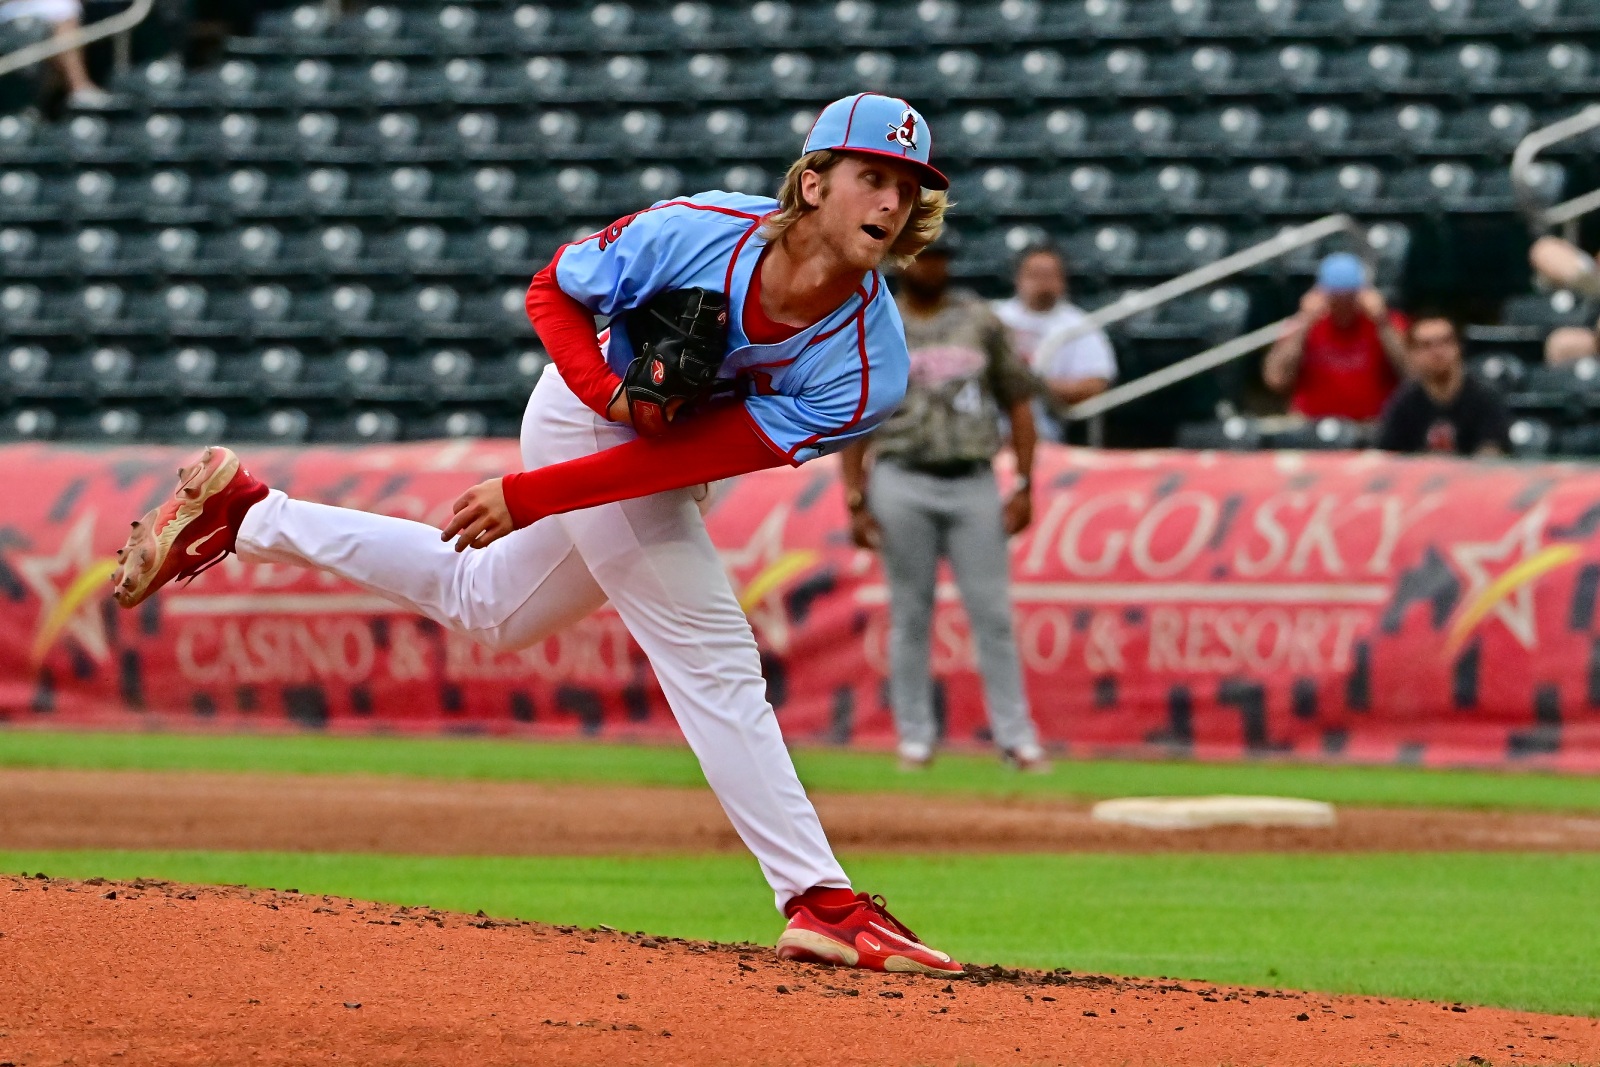 Quinn Mathews, St. Louis' hottest prospect, is now pitching for Springfield